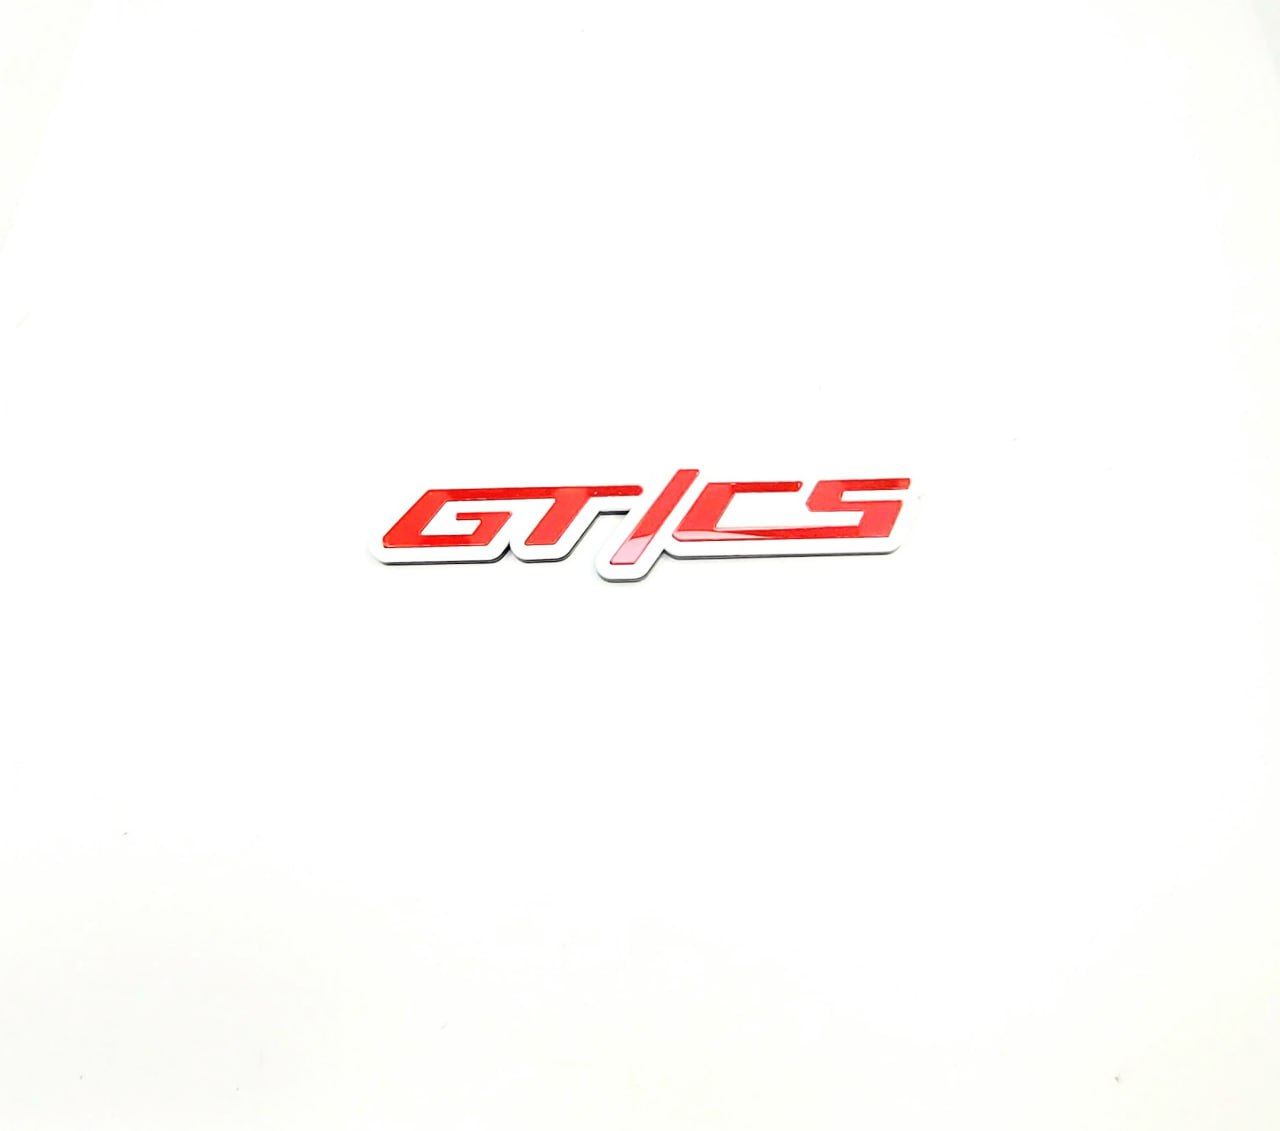 Ford Radiator grille emblem with GT/CS logo